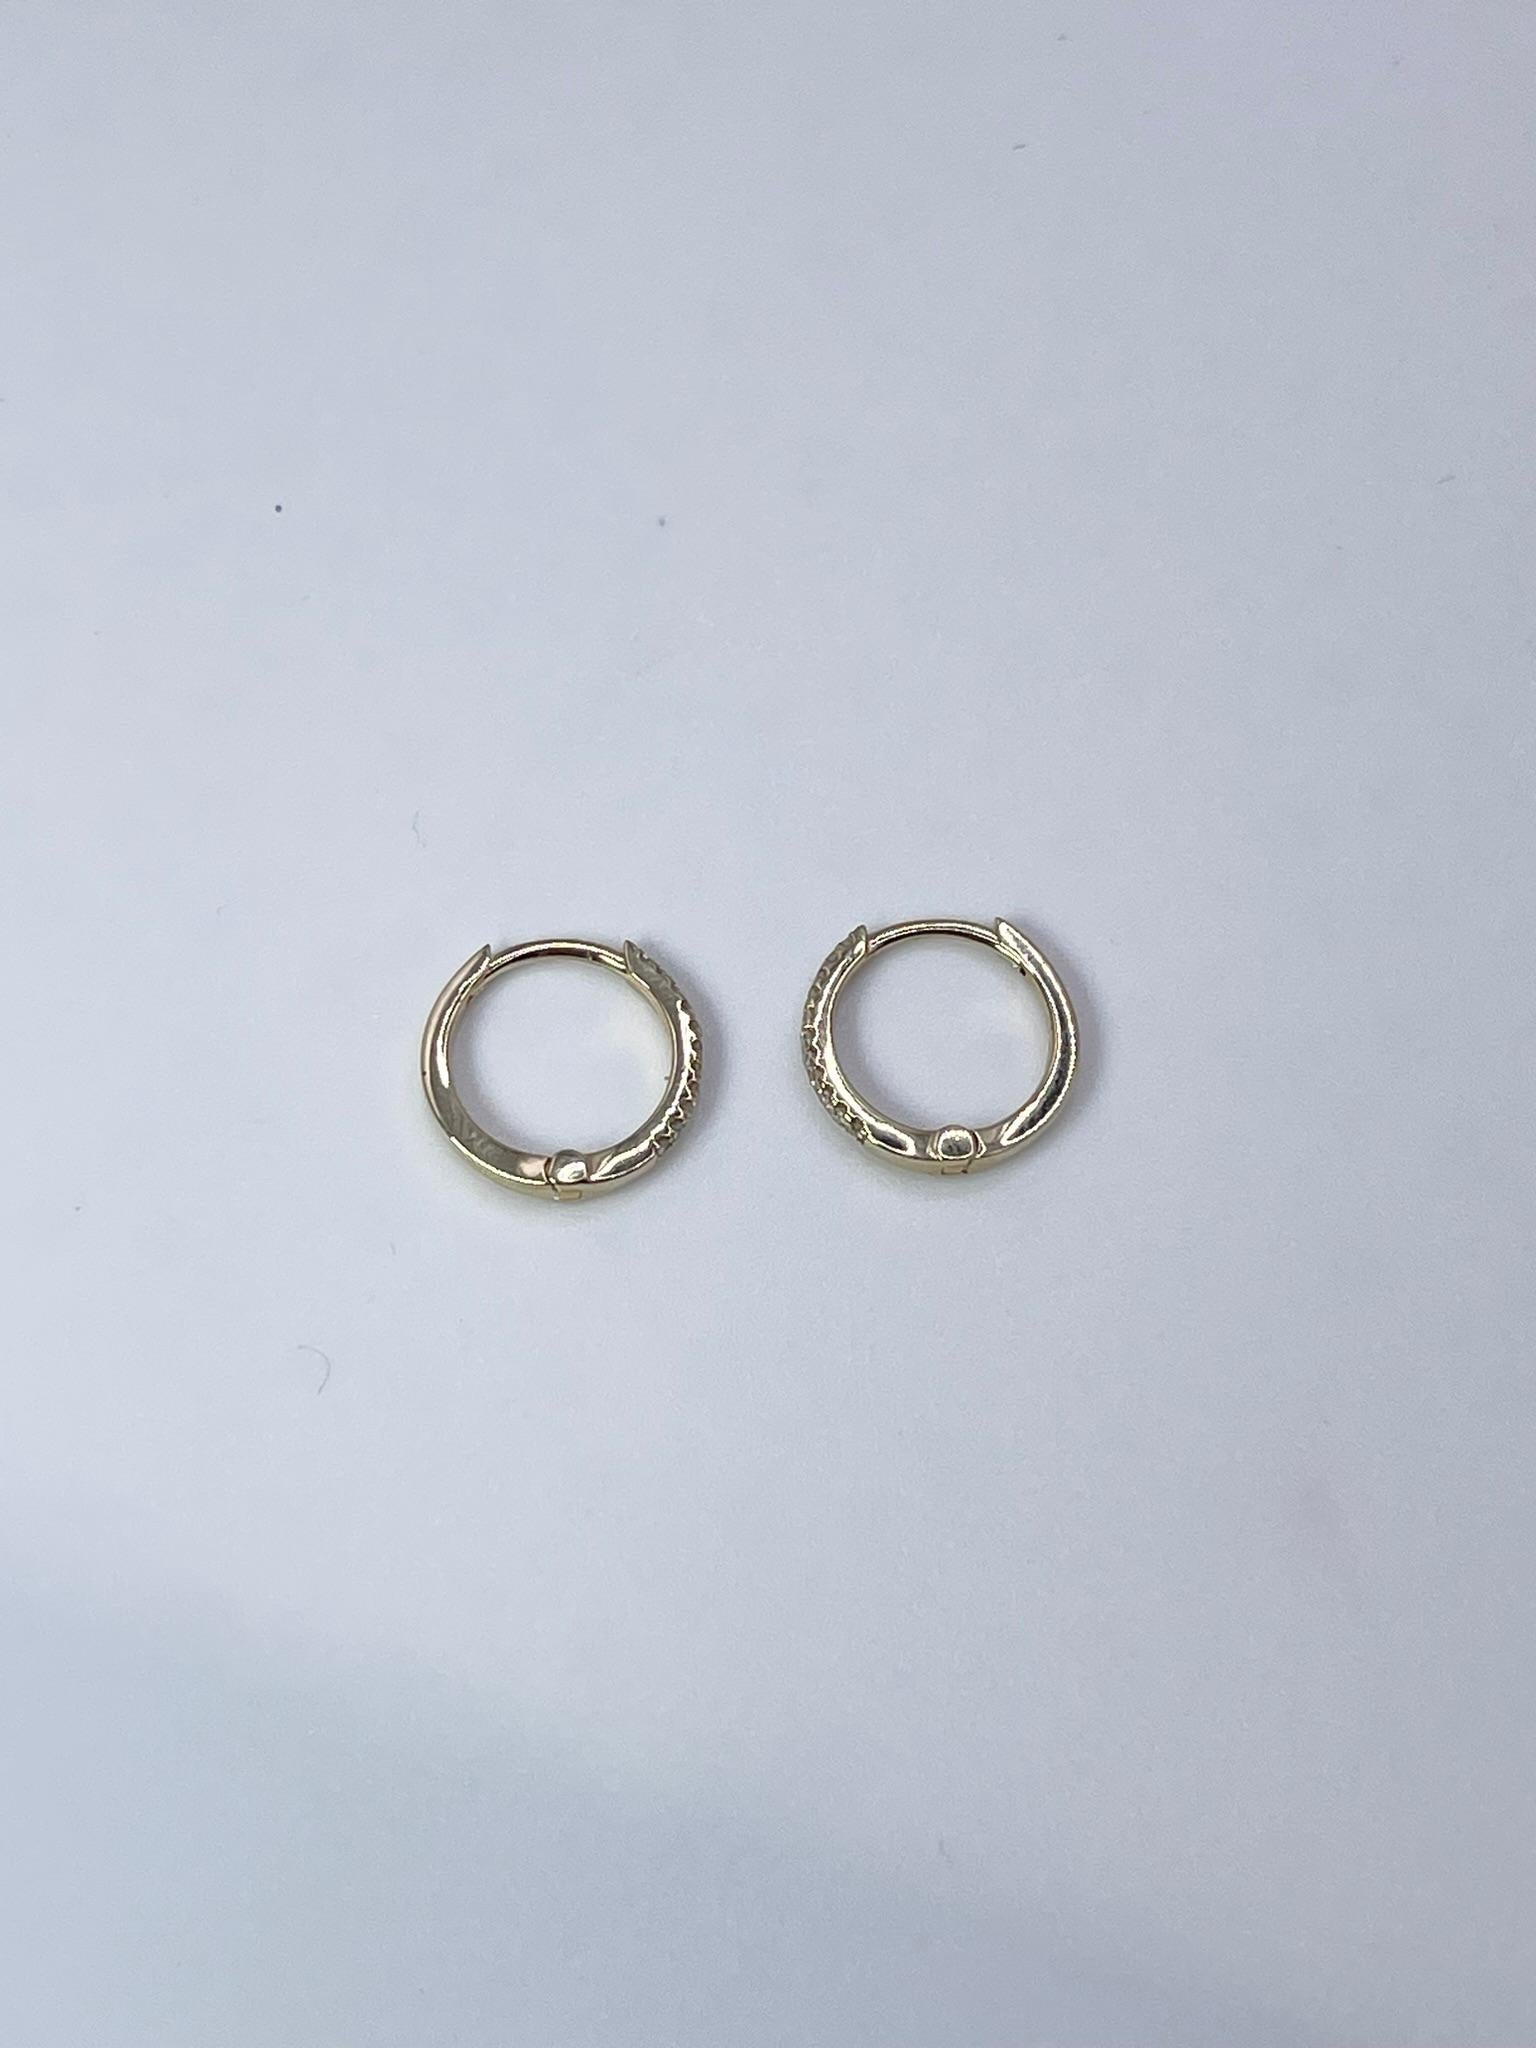 Diamond earring hoops small and dainty. 

CENTER STONE: NATURAL DIAMONDS
CARAT: 0.08CT
CLARITY: SI
COLOR: G
CUT: ROUND BRILLIANT
STAMP: 14kt
GRAM WEIGHT: 1.40gr
CLOSURE: Hoop
Diameter: 10mm
Item numner: 150-00086 MAP

WHAT YOU GET AT STAMPAR